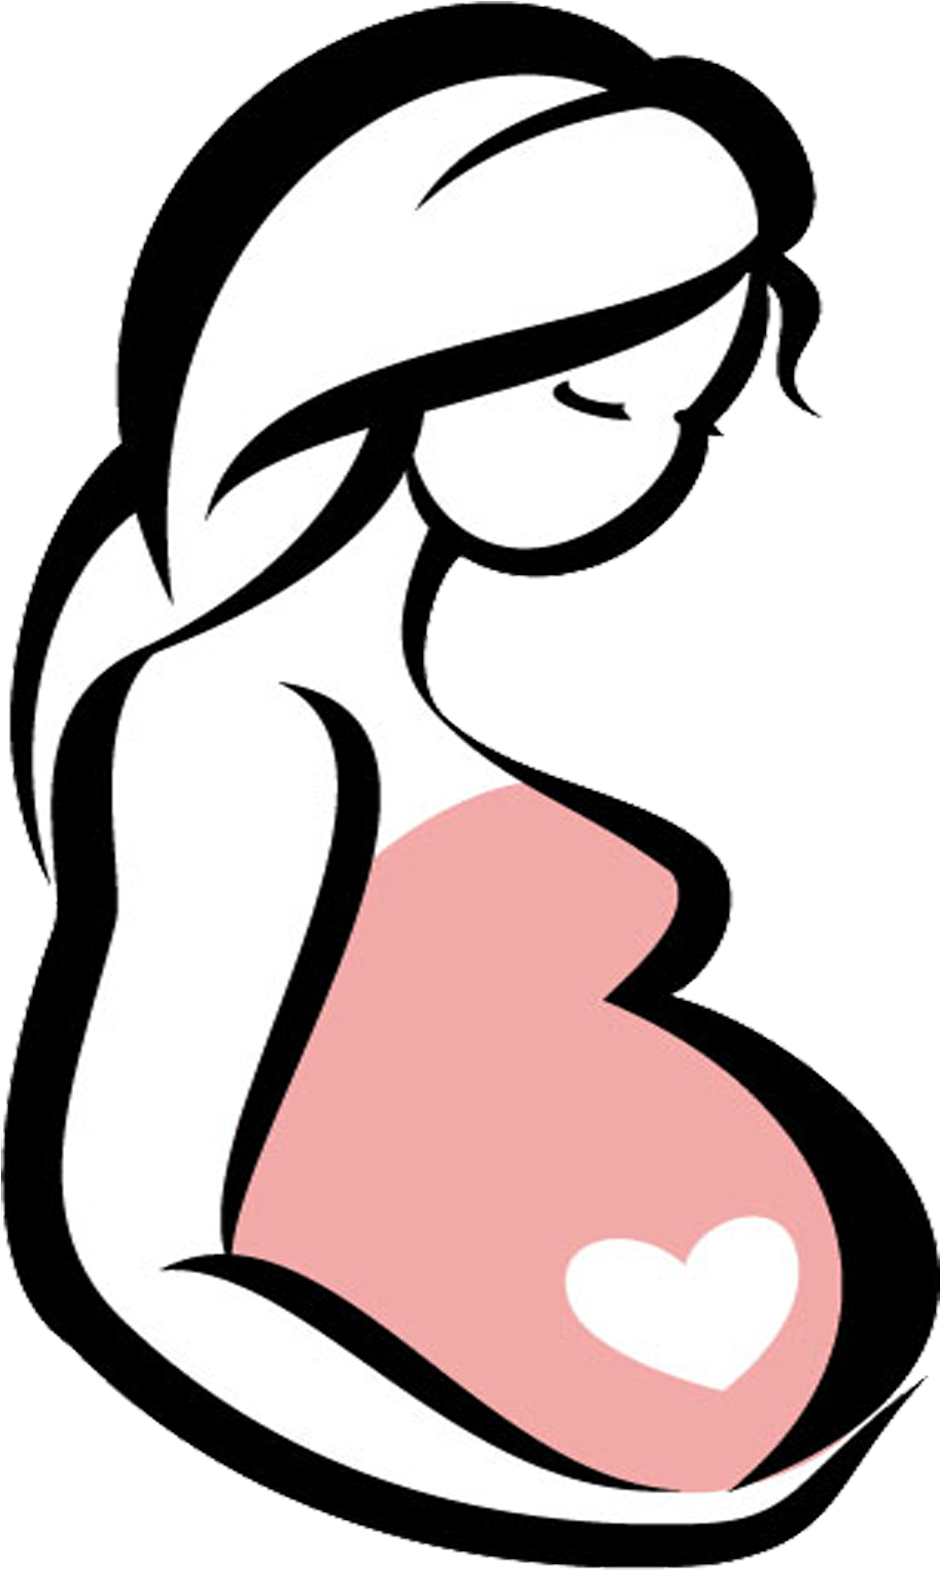 Childbirth infant woman surgery. Pregnancy clipart birthing